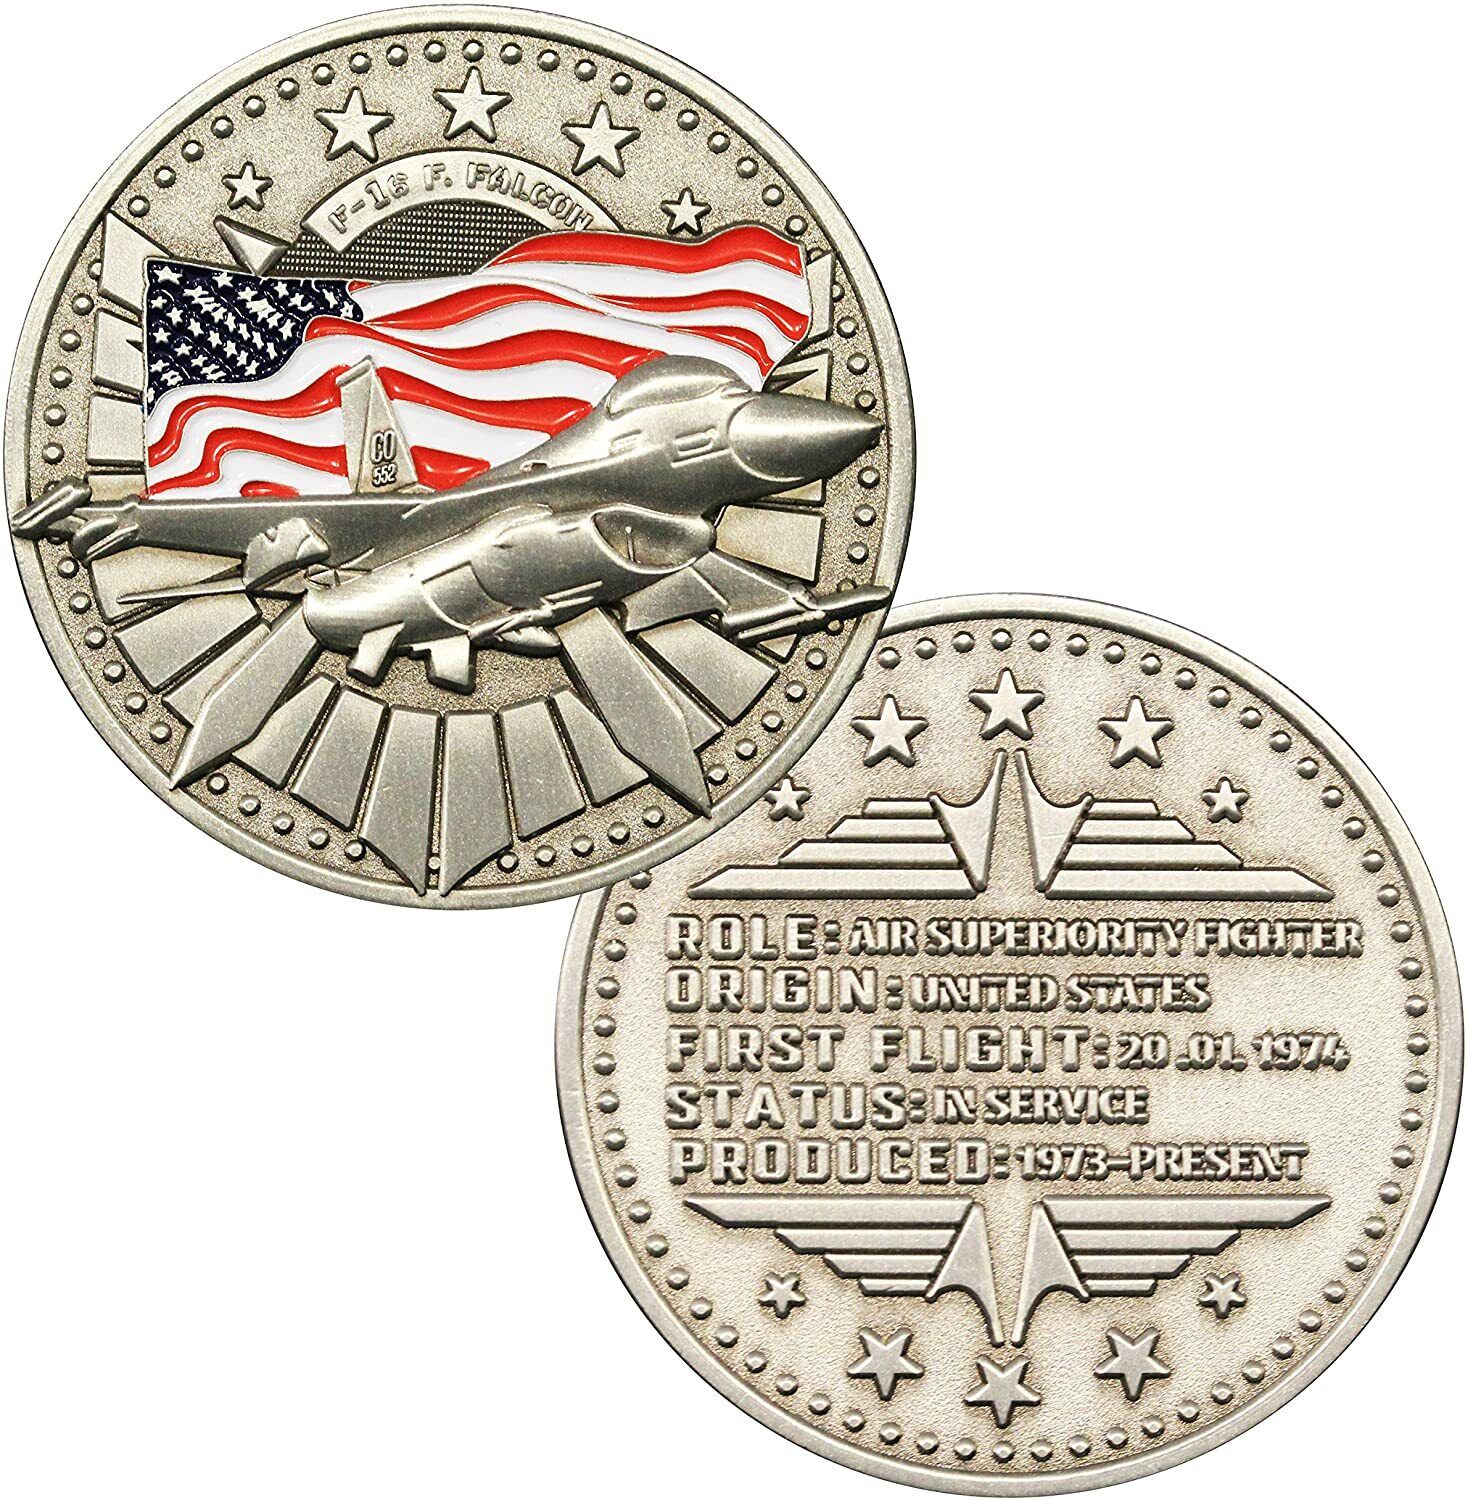 F-16 Fighting Falcon Aircraft Challenge Coin